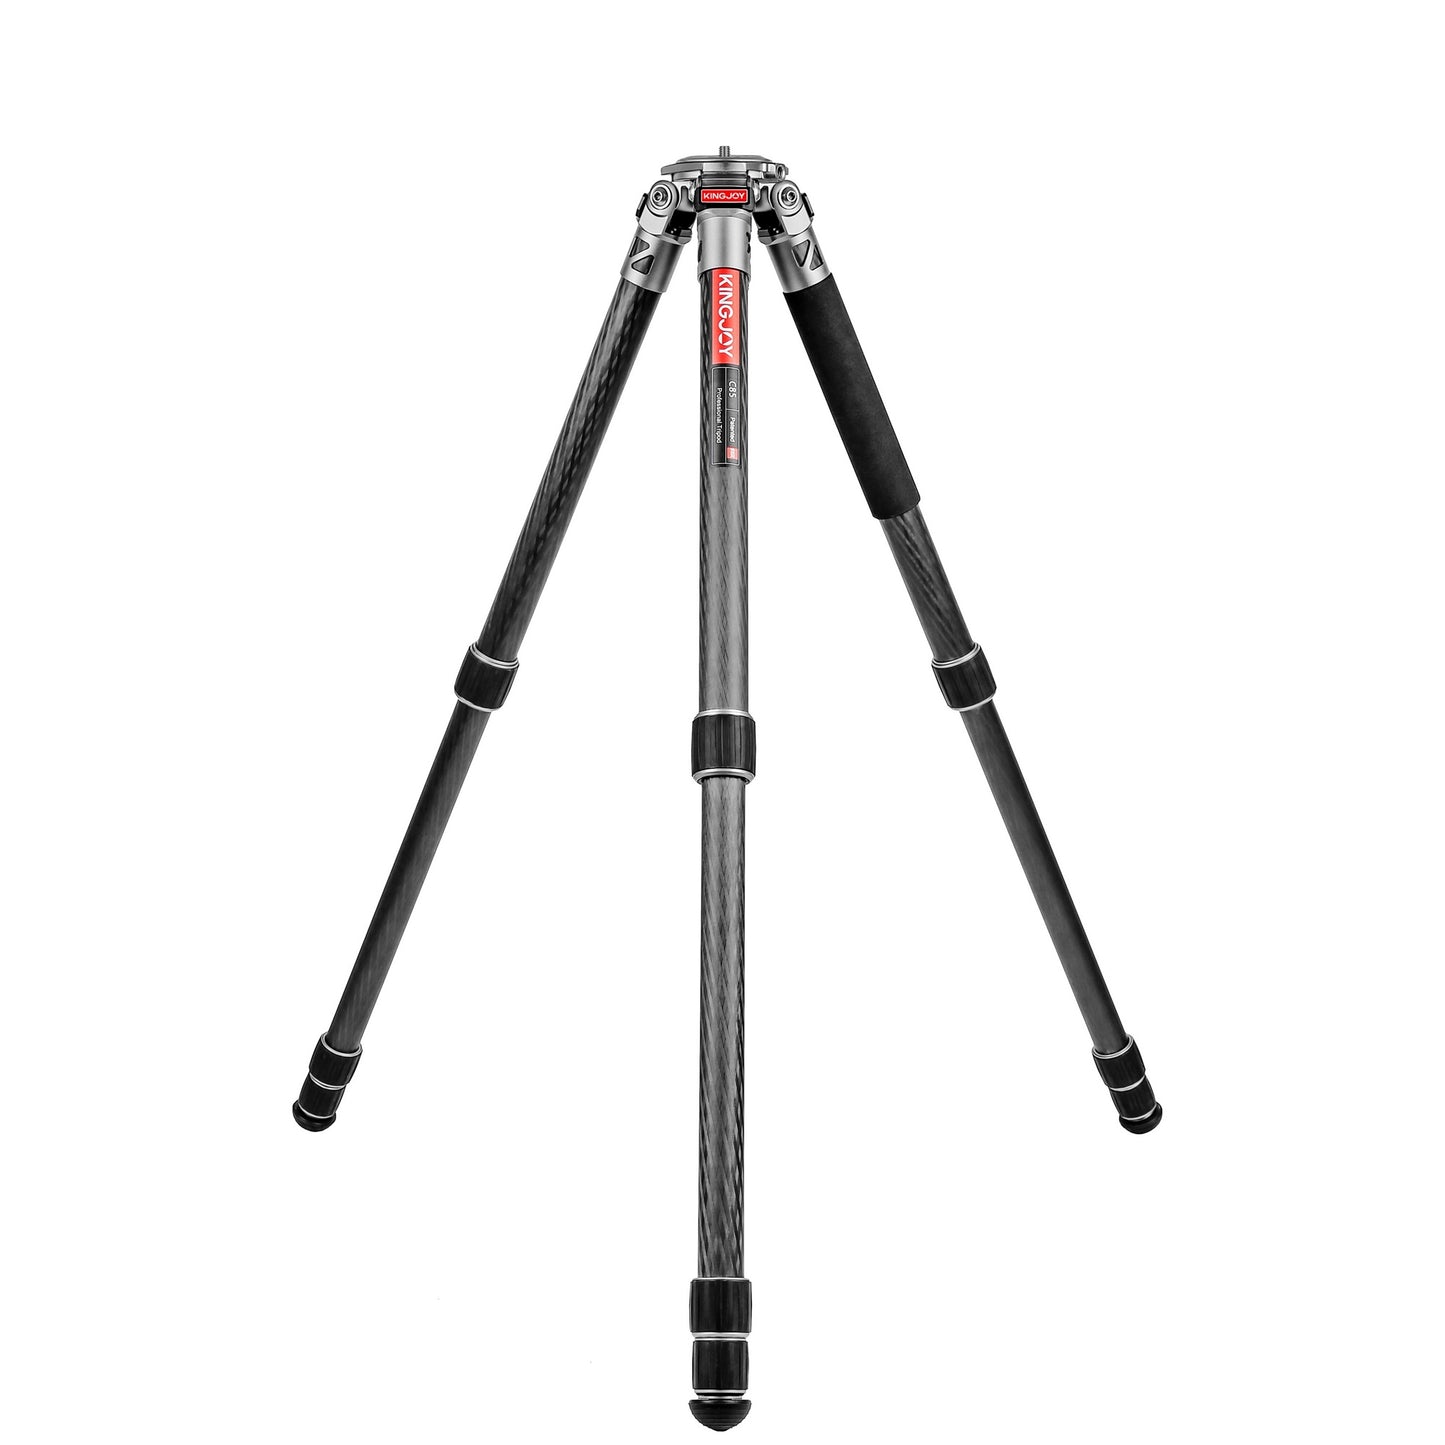 Kingjoy C85 professional carbon fiber tripod-4 section, 60.6in, 4.4lbs, without center column